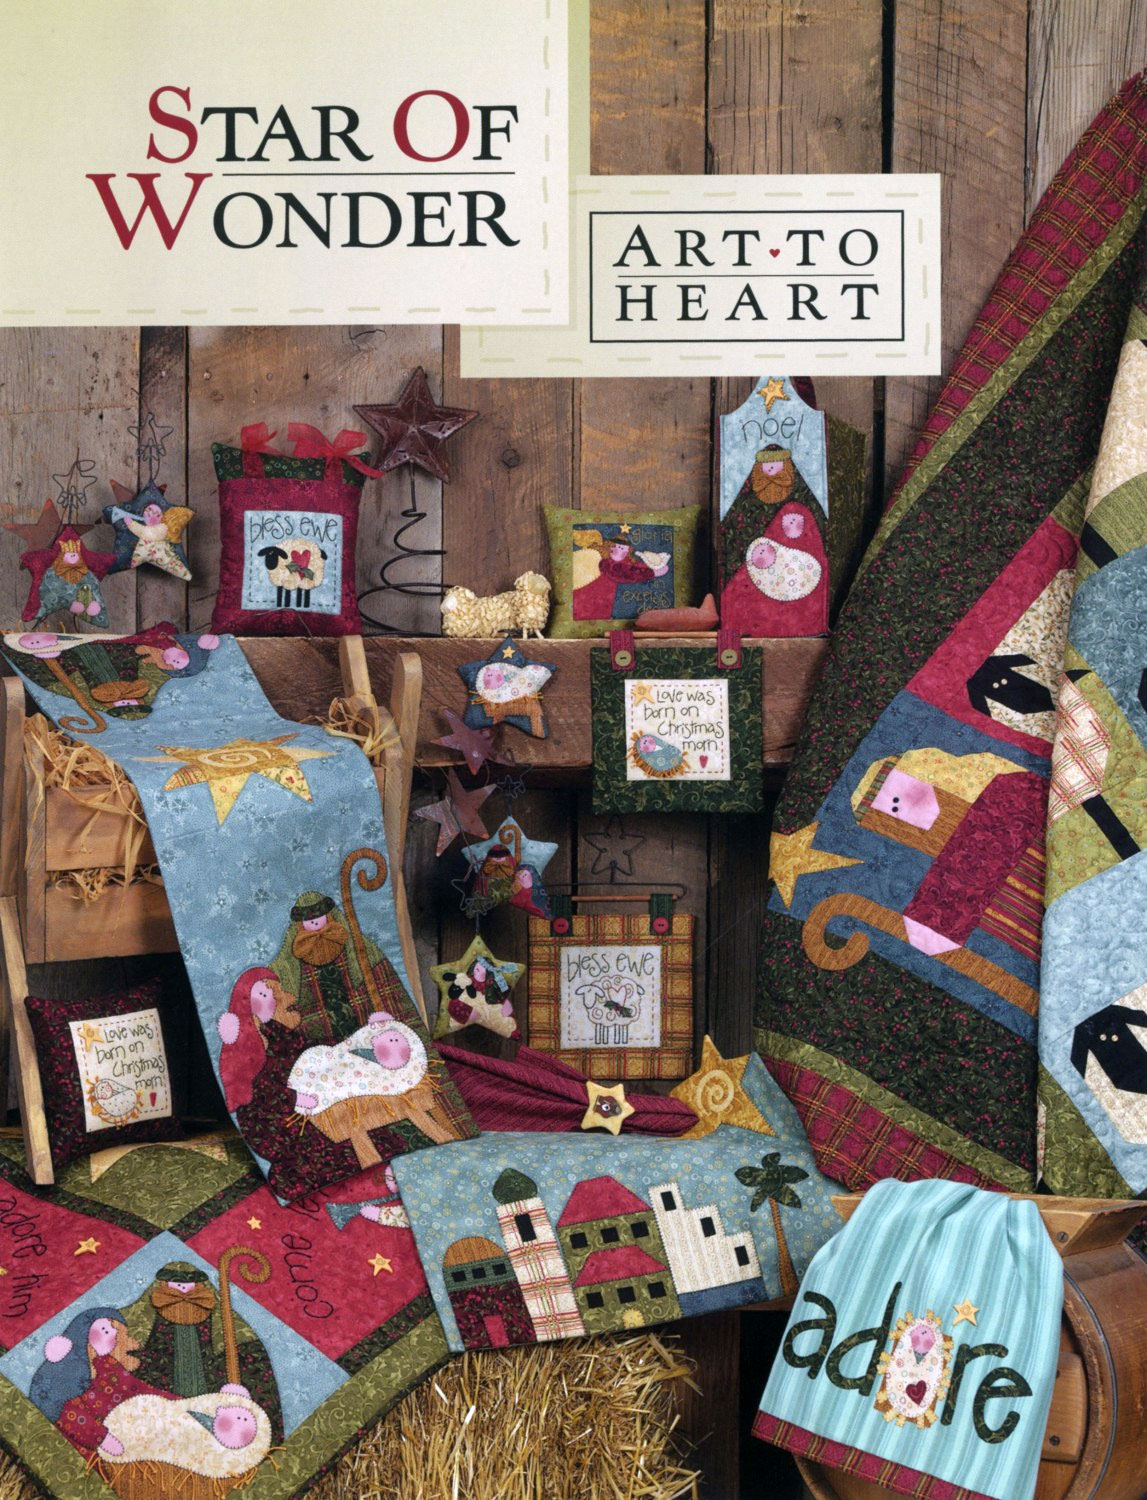 Star-of-wonder-sewing-pattern-book-Art-To-Heart-front